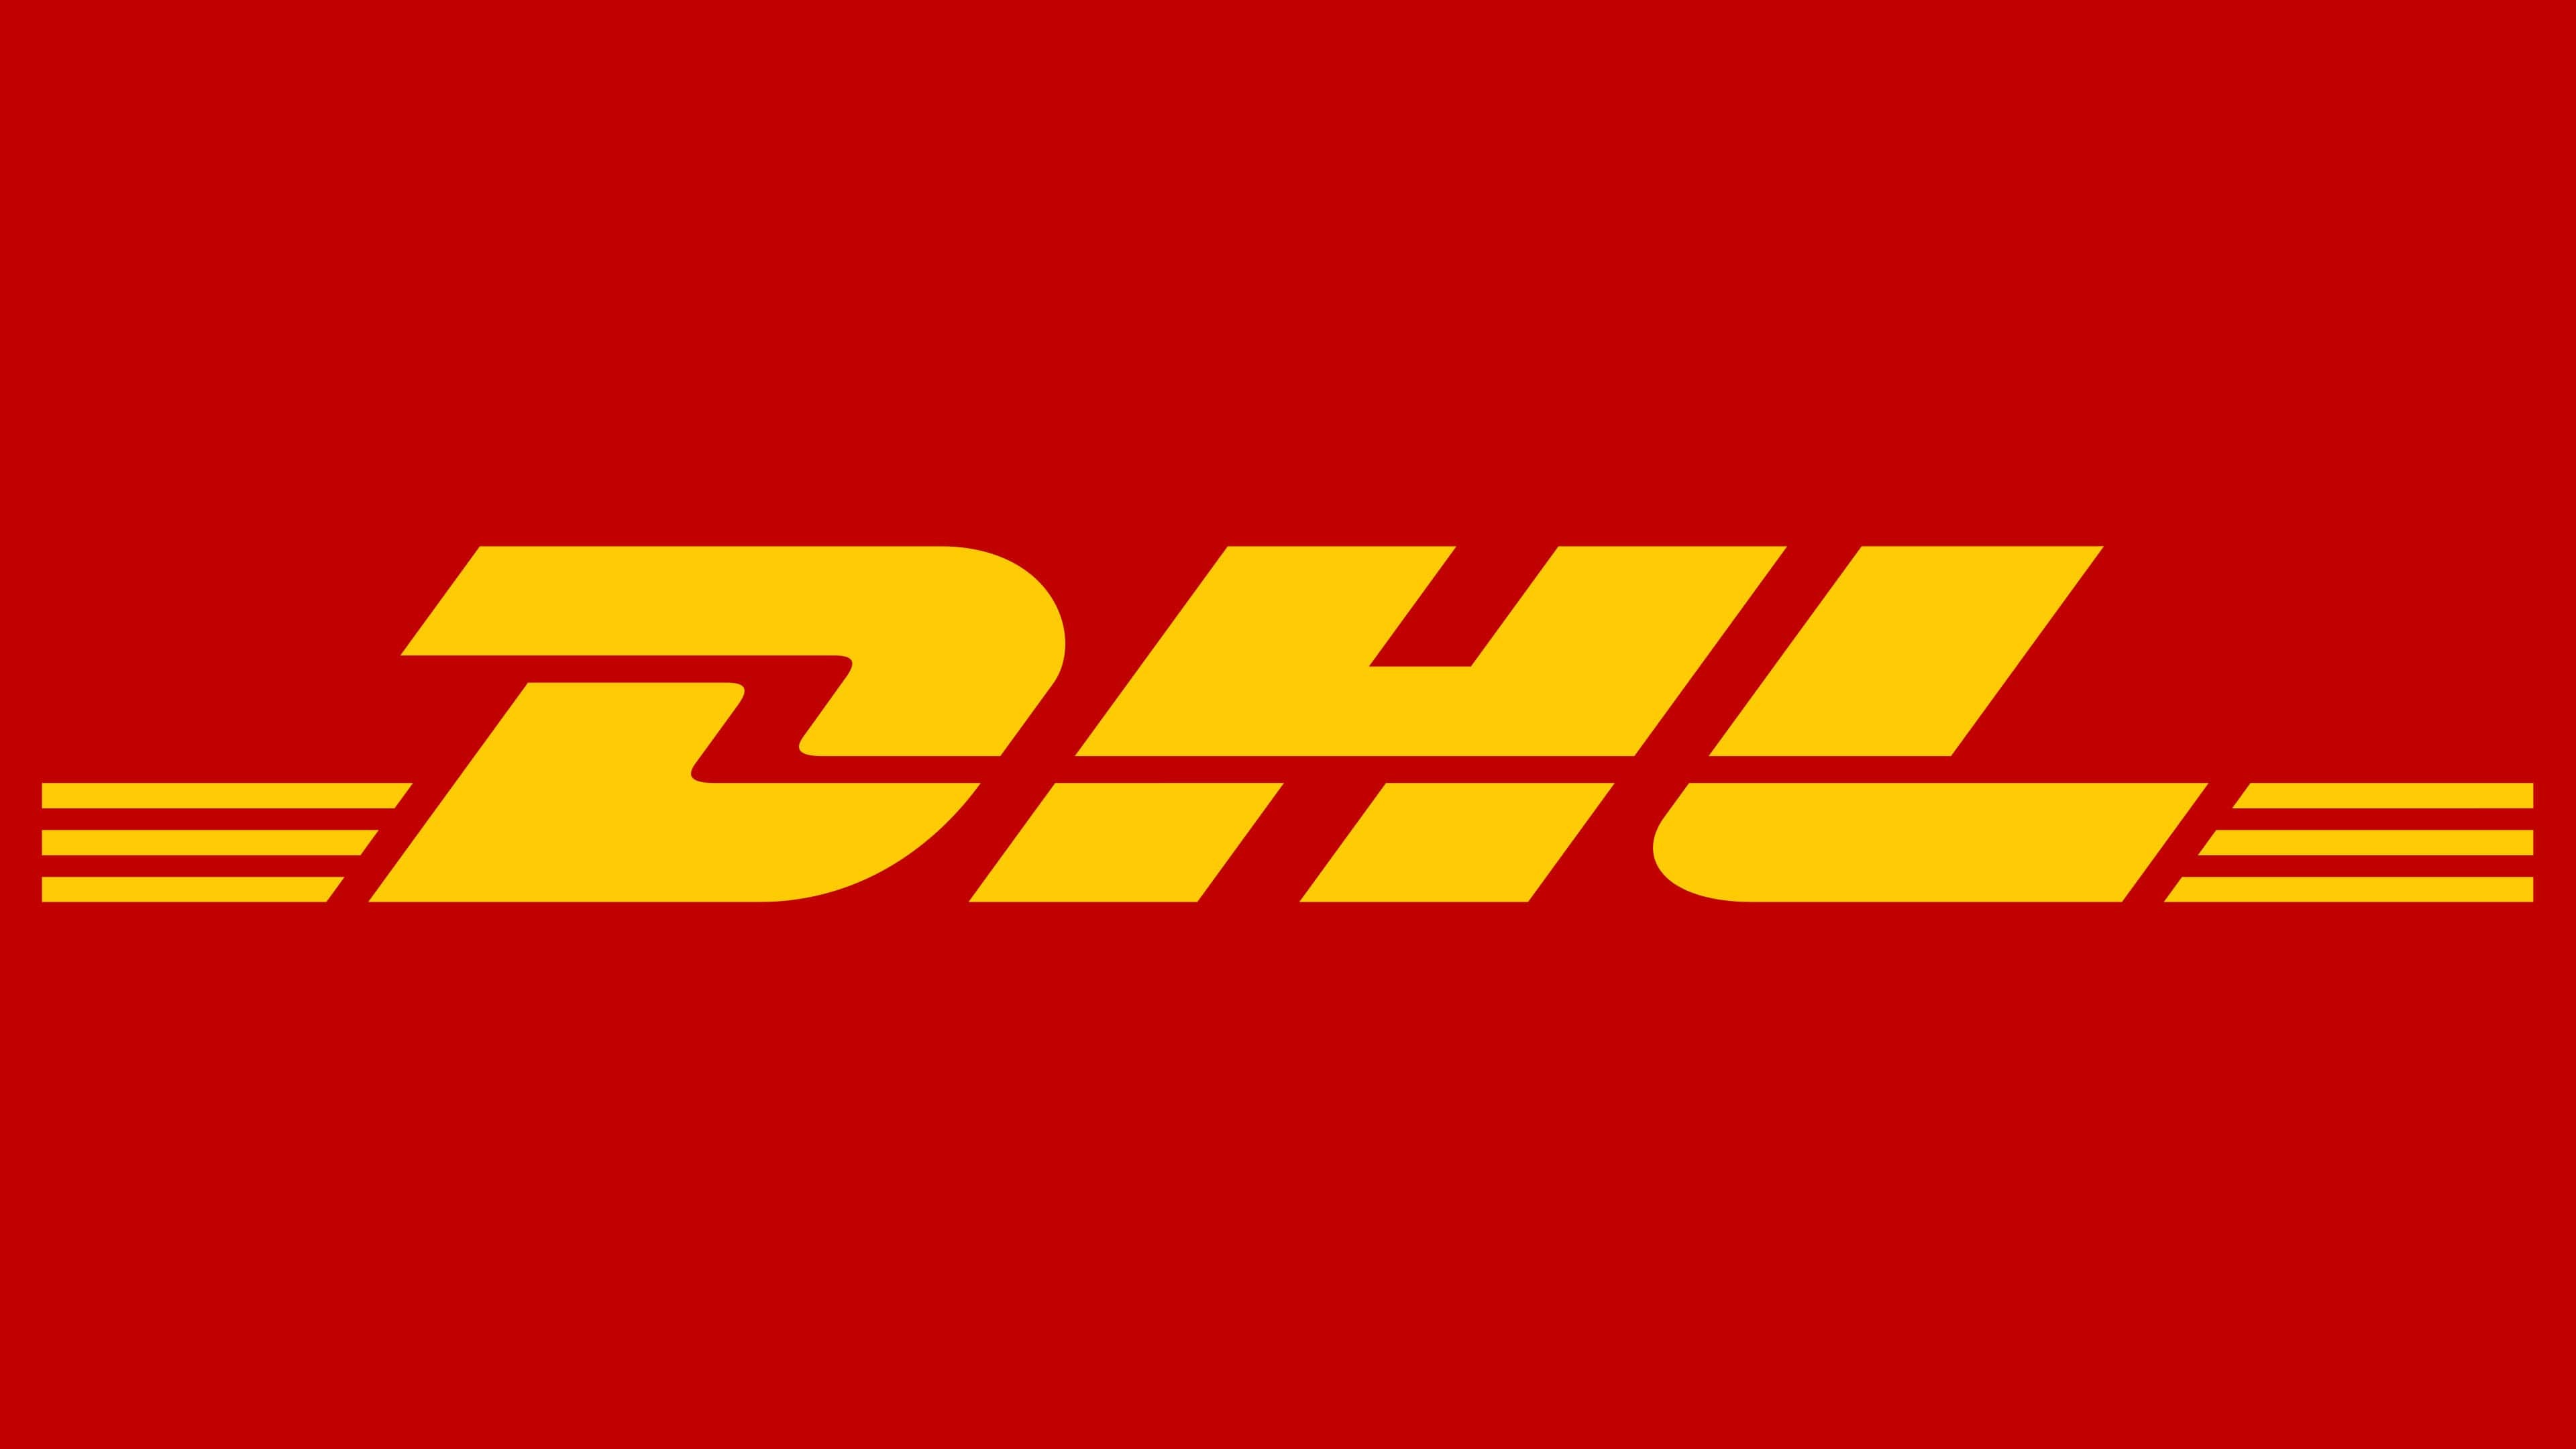 DHL: The leading international courier service, Logotype. 3840x2160 4K Background.